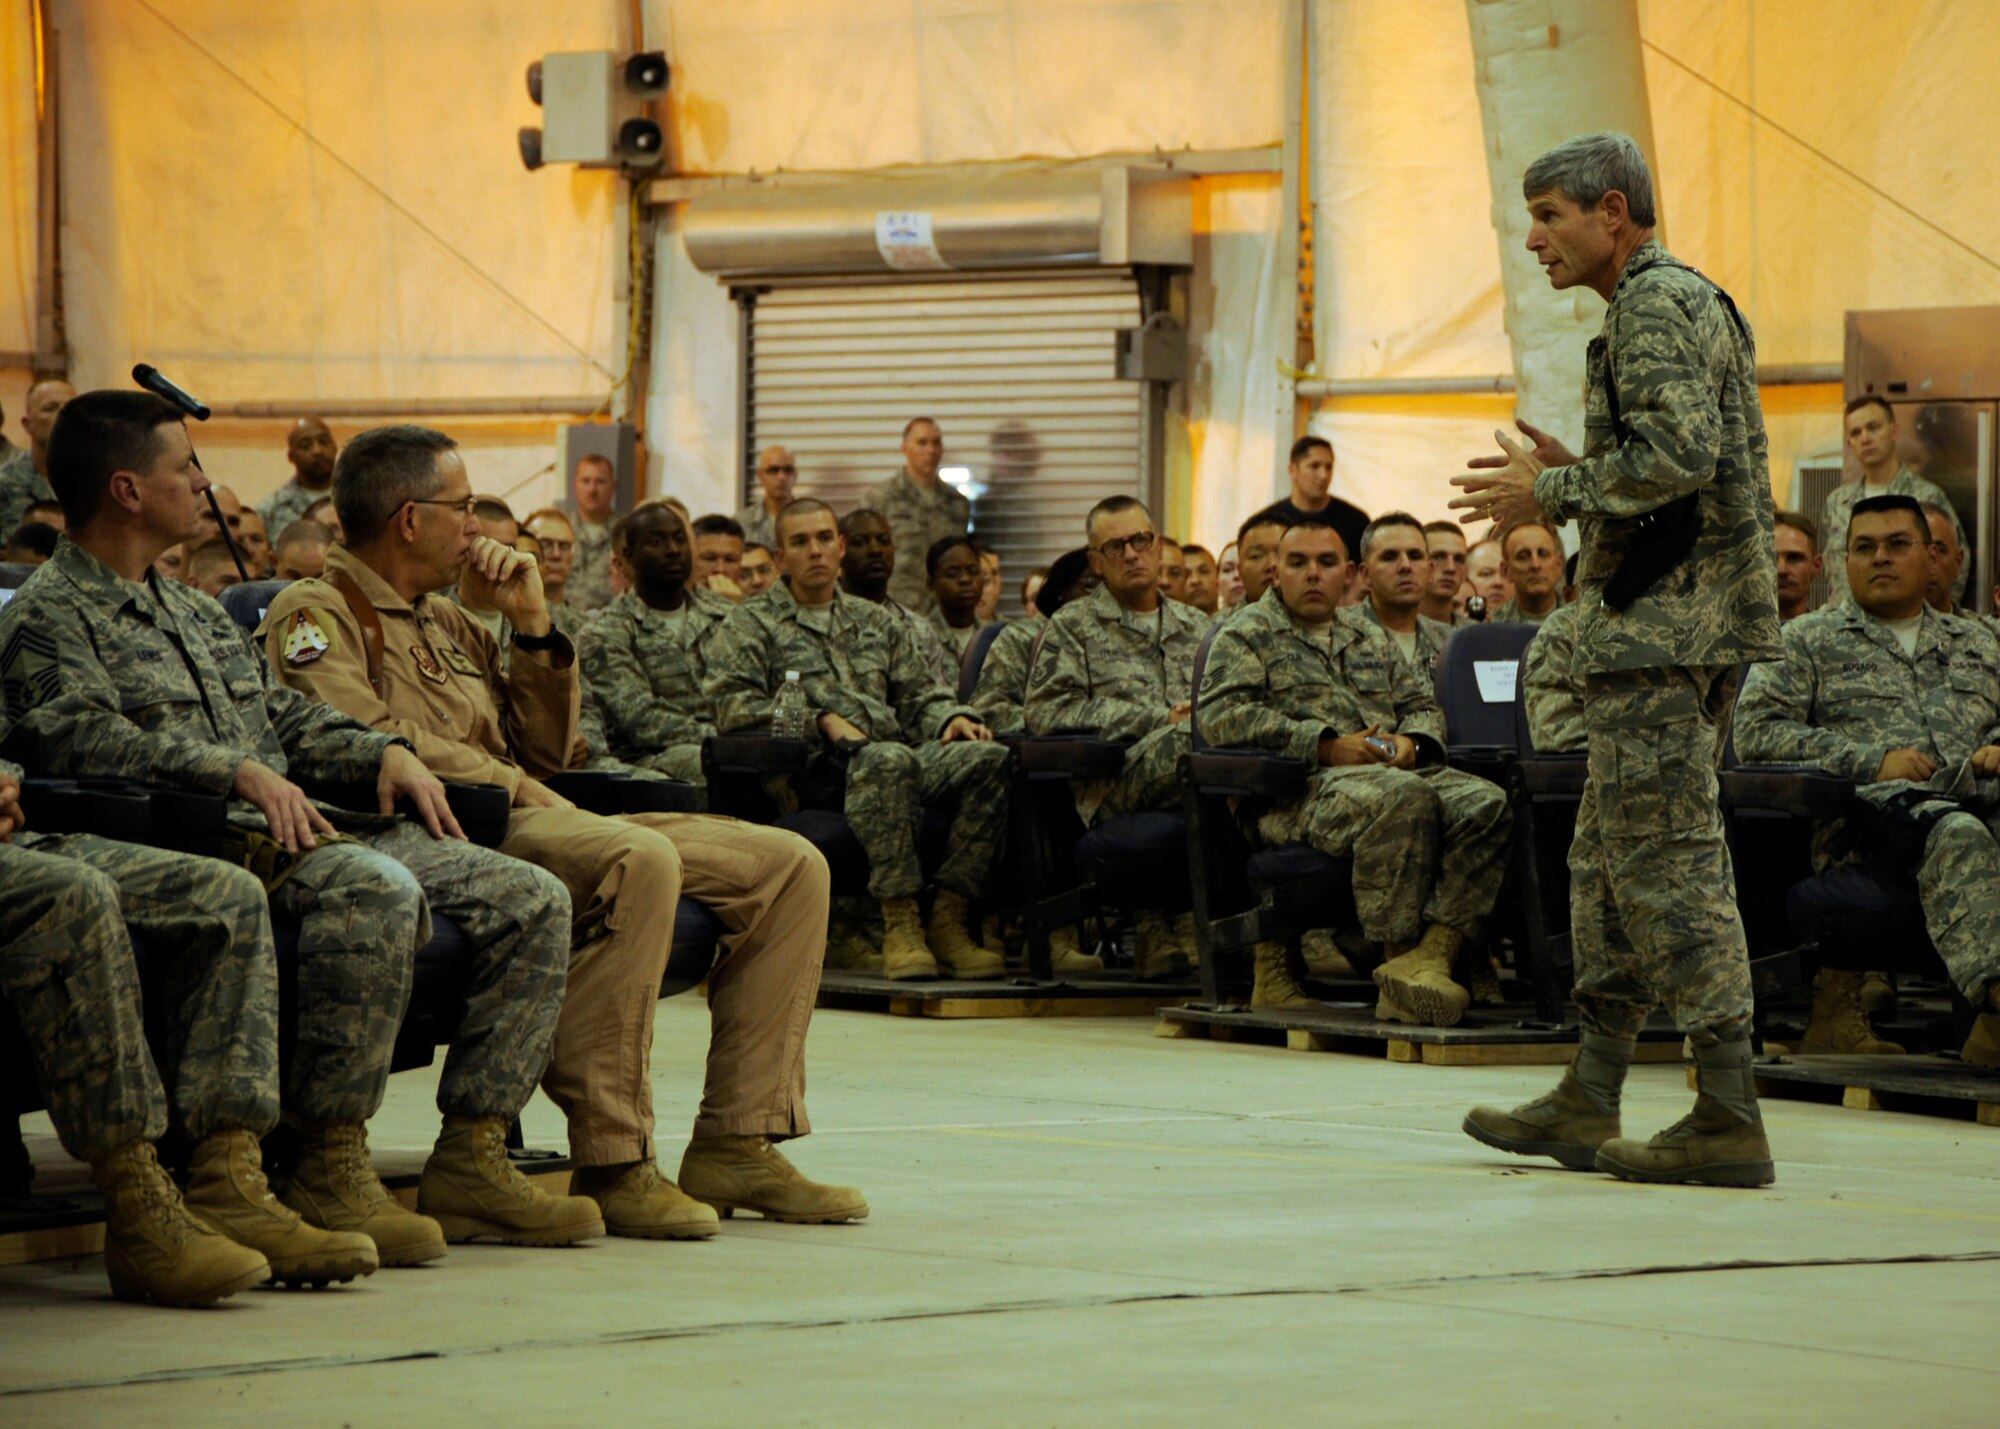 Air Force Chief of Staff Gen. Norton Schwartz speaks to Airmen from the 447th Air Expeditionary Group at Sather Air Base, Iraq, Oct. 24. This is the CSAF's first trip to Iraq since assuming his current position as the Air Force chief of staff. (U.S. Air Force photo/Staff Sgt. Paul Villanueva II)